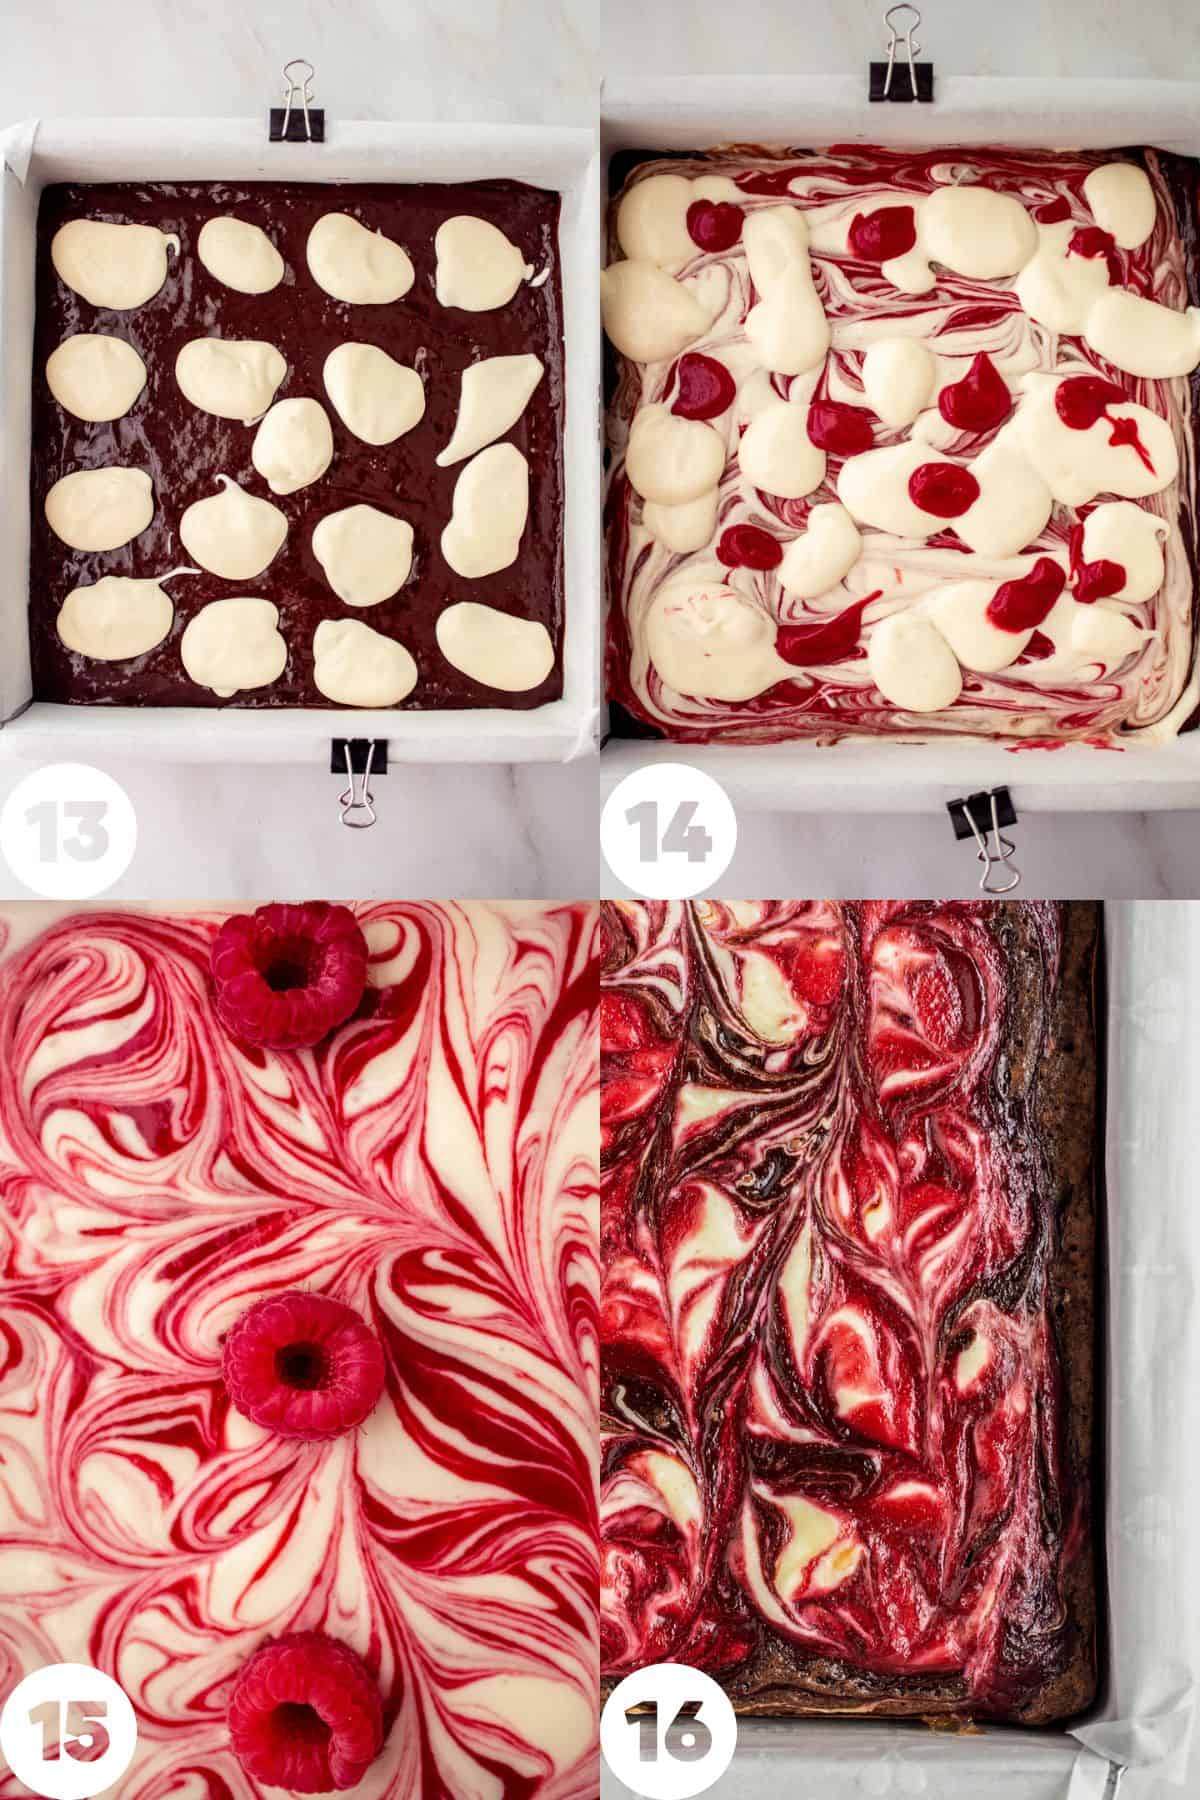 step by step recipe instructions, cheesecake dolloped on top, raspberry jam added, mixture swirled and fresh raspberries on top, baked brownies